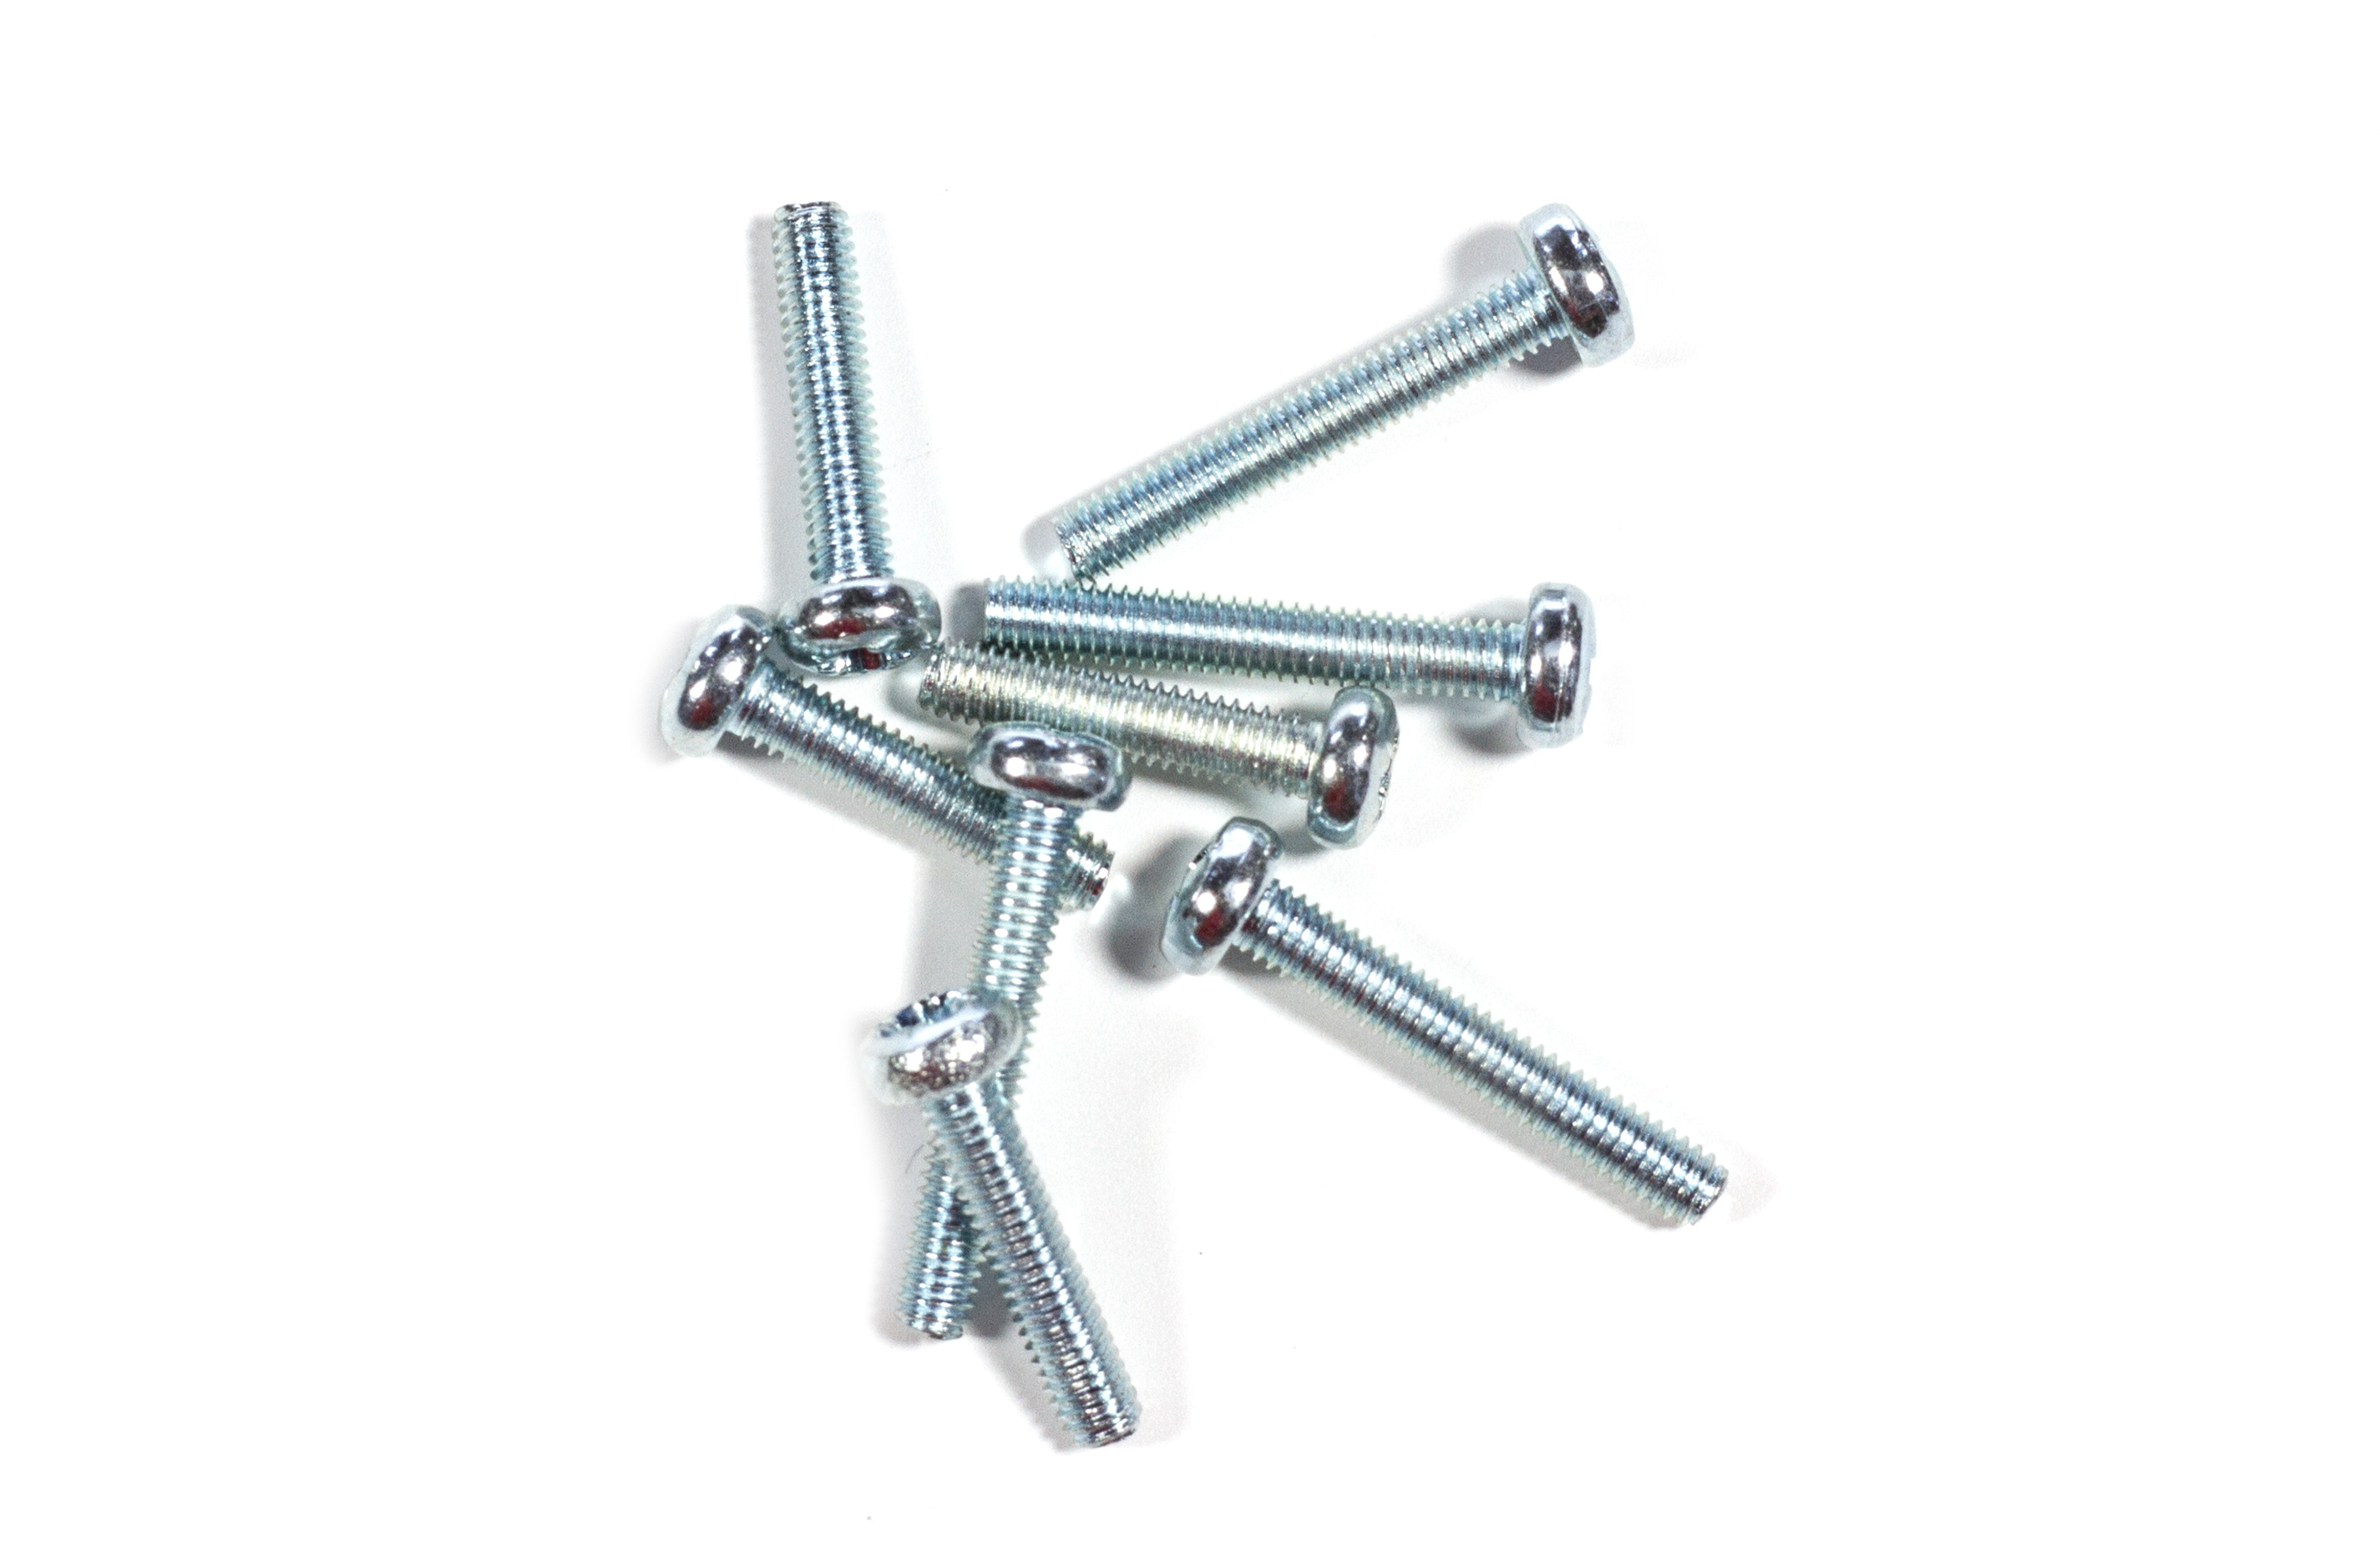 TT1000/04 Spare screws for electronic switch TT1000